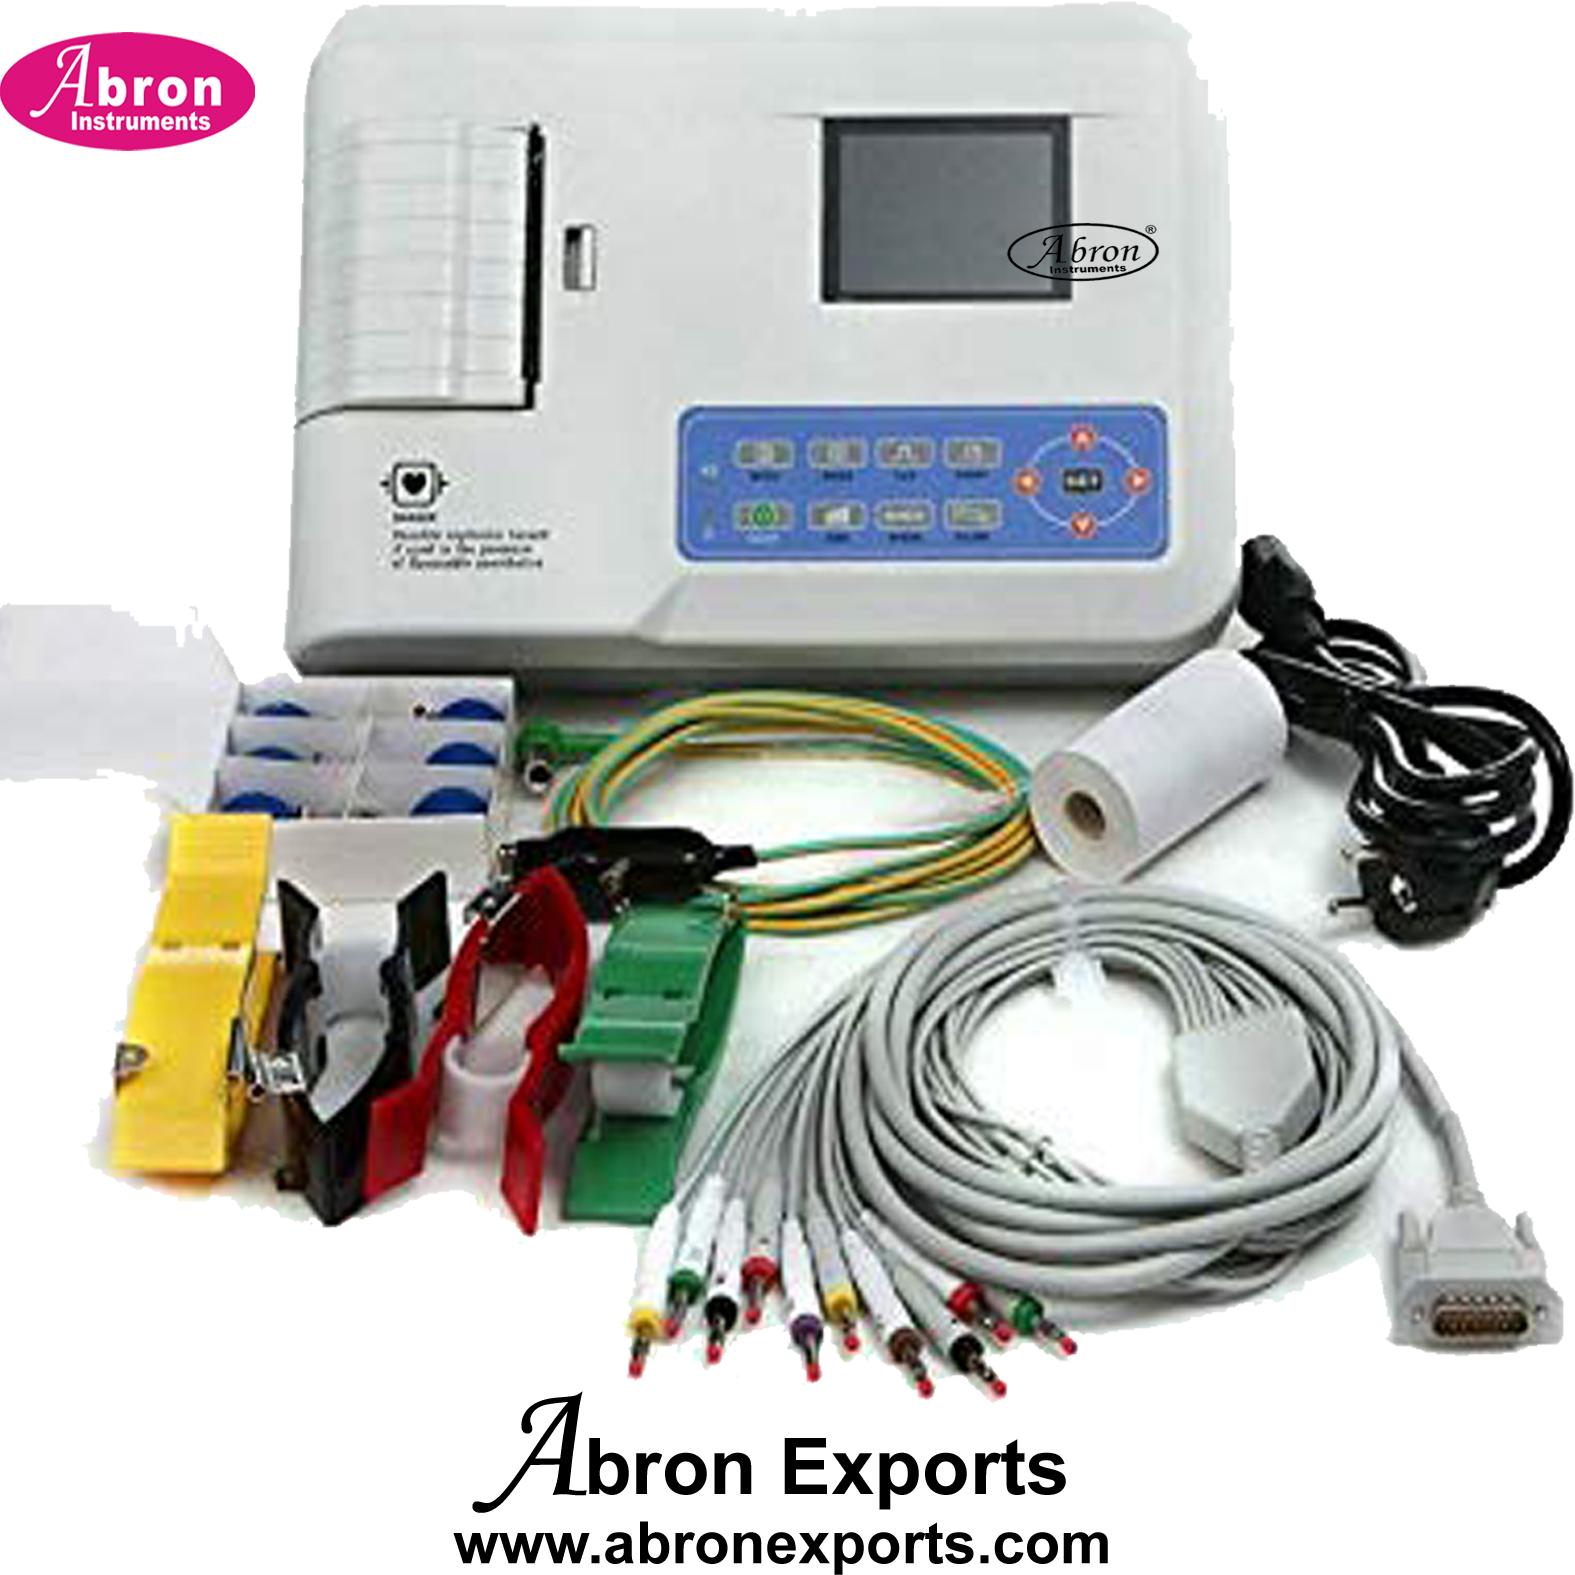 ECG Machine 3 channel or single cannel Light weight Print Abron ABM-2502CH3 